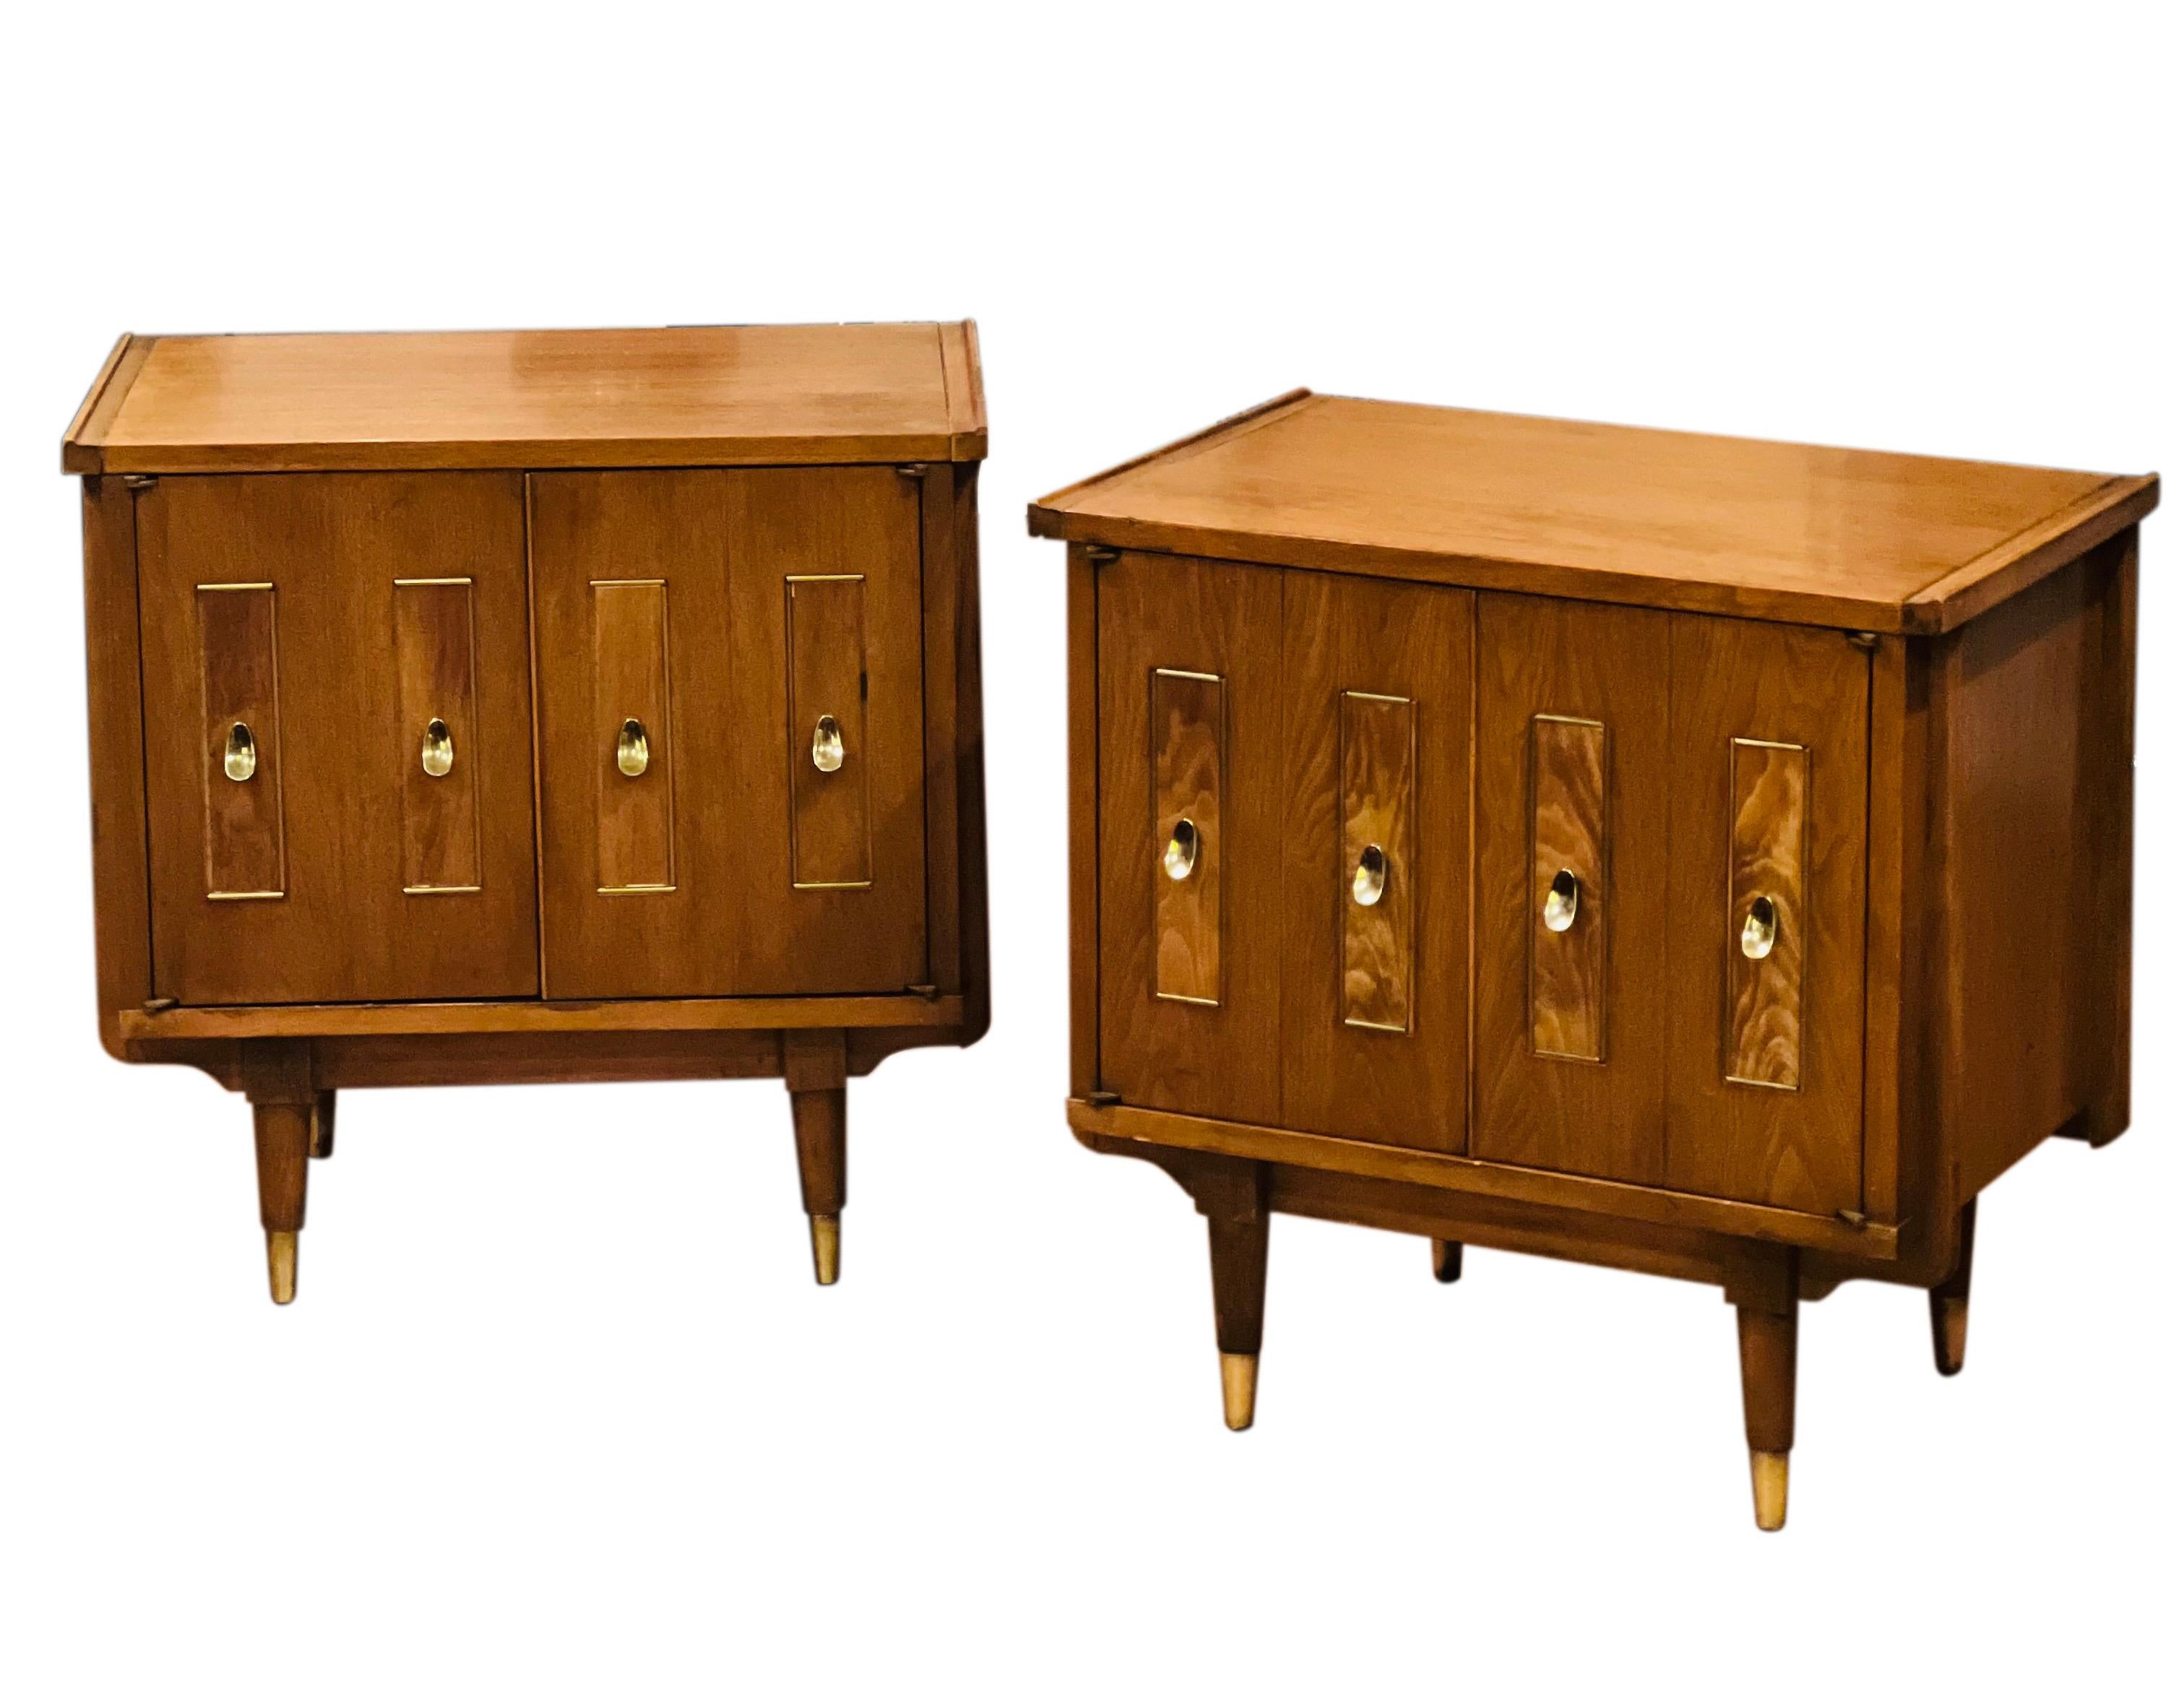 Exceptional pair of mid-century two-door walnut nightstands.

The stands have lots of unique design details throughout. The shiny orecchiette shaped brass pulls beautifully highlight the front paneled doors. They have interesting wood grain with